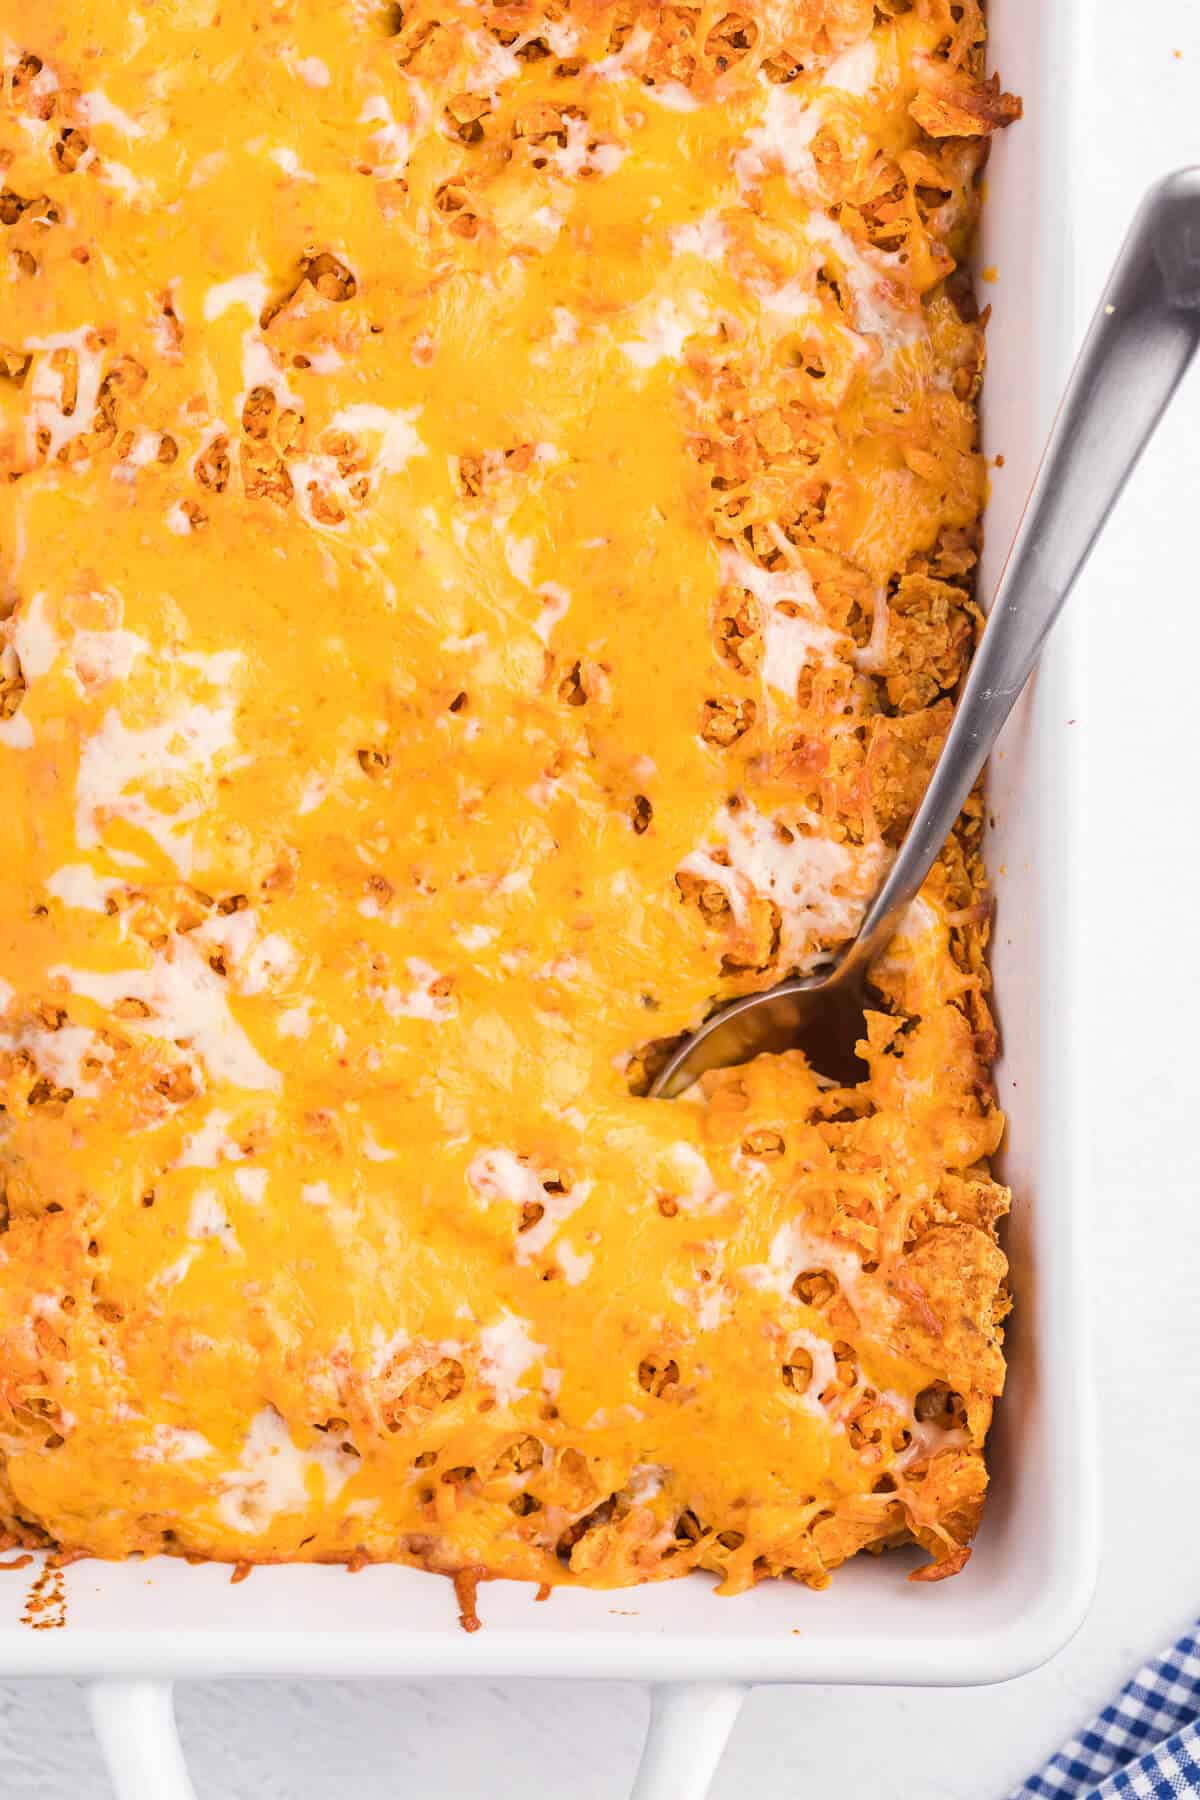 Doritos Casserole Recipe - Take Mexican night to a whole new level with this easy taco bake recipe. Made with ground beef, sour cream, spices and loads of cheese, it's zesty with hearty Tex Mex flavor. A yummy dinner recipe your family will love!